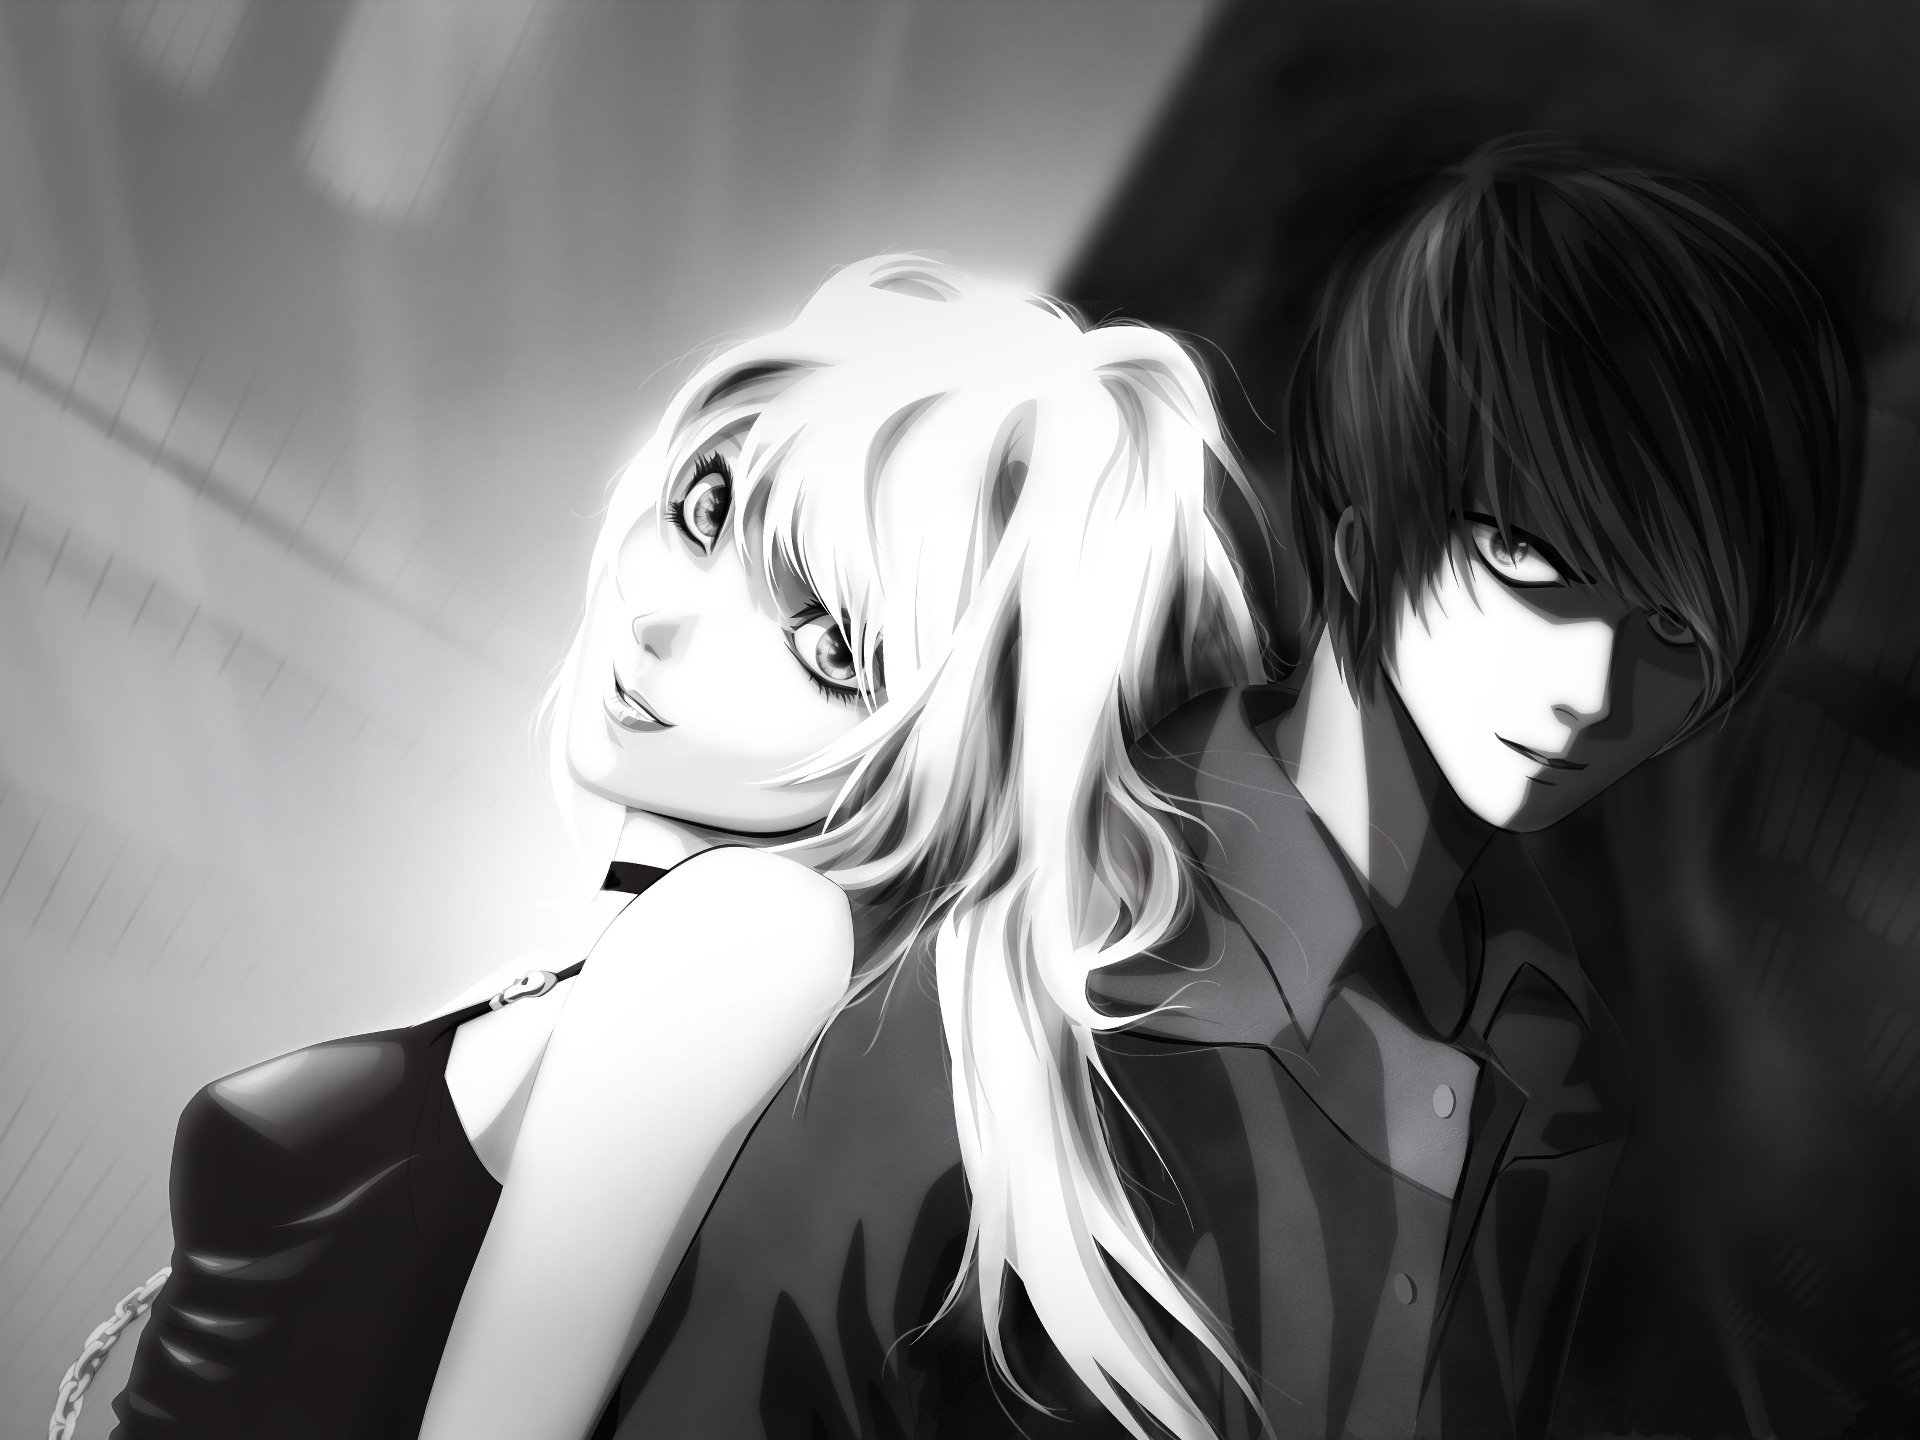 Anime Death Note Wallpaper